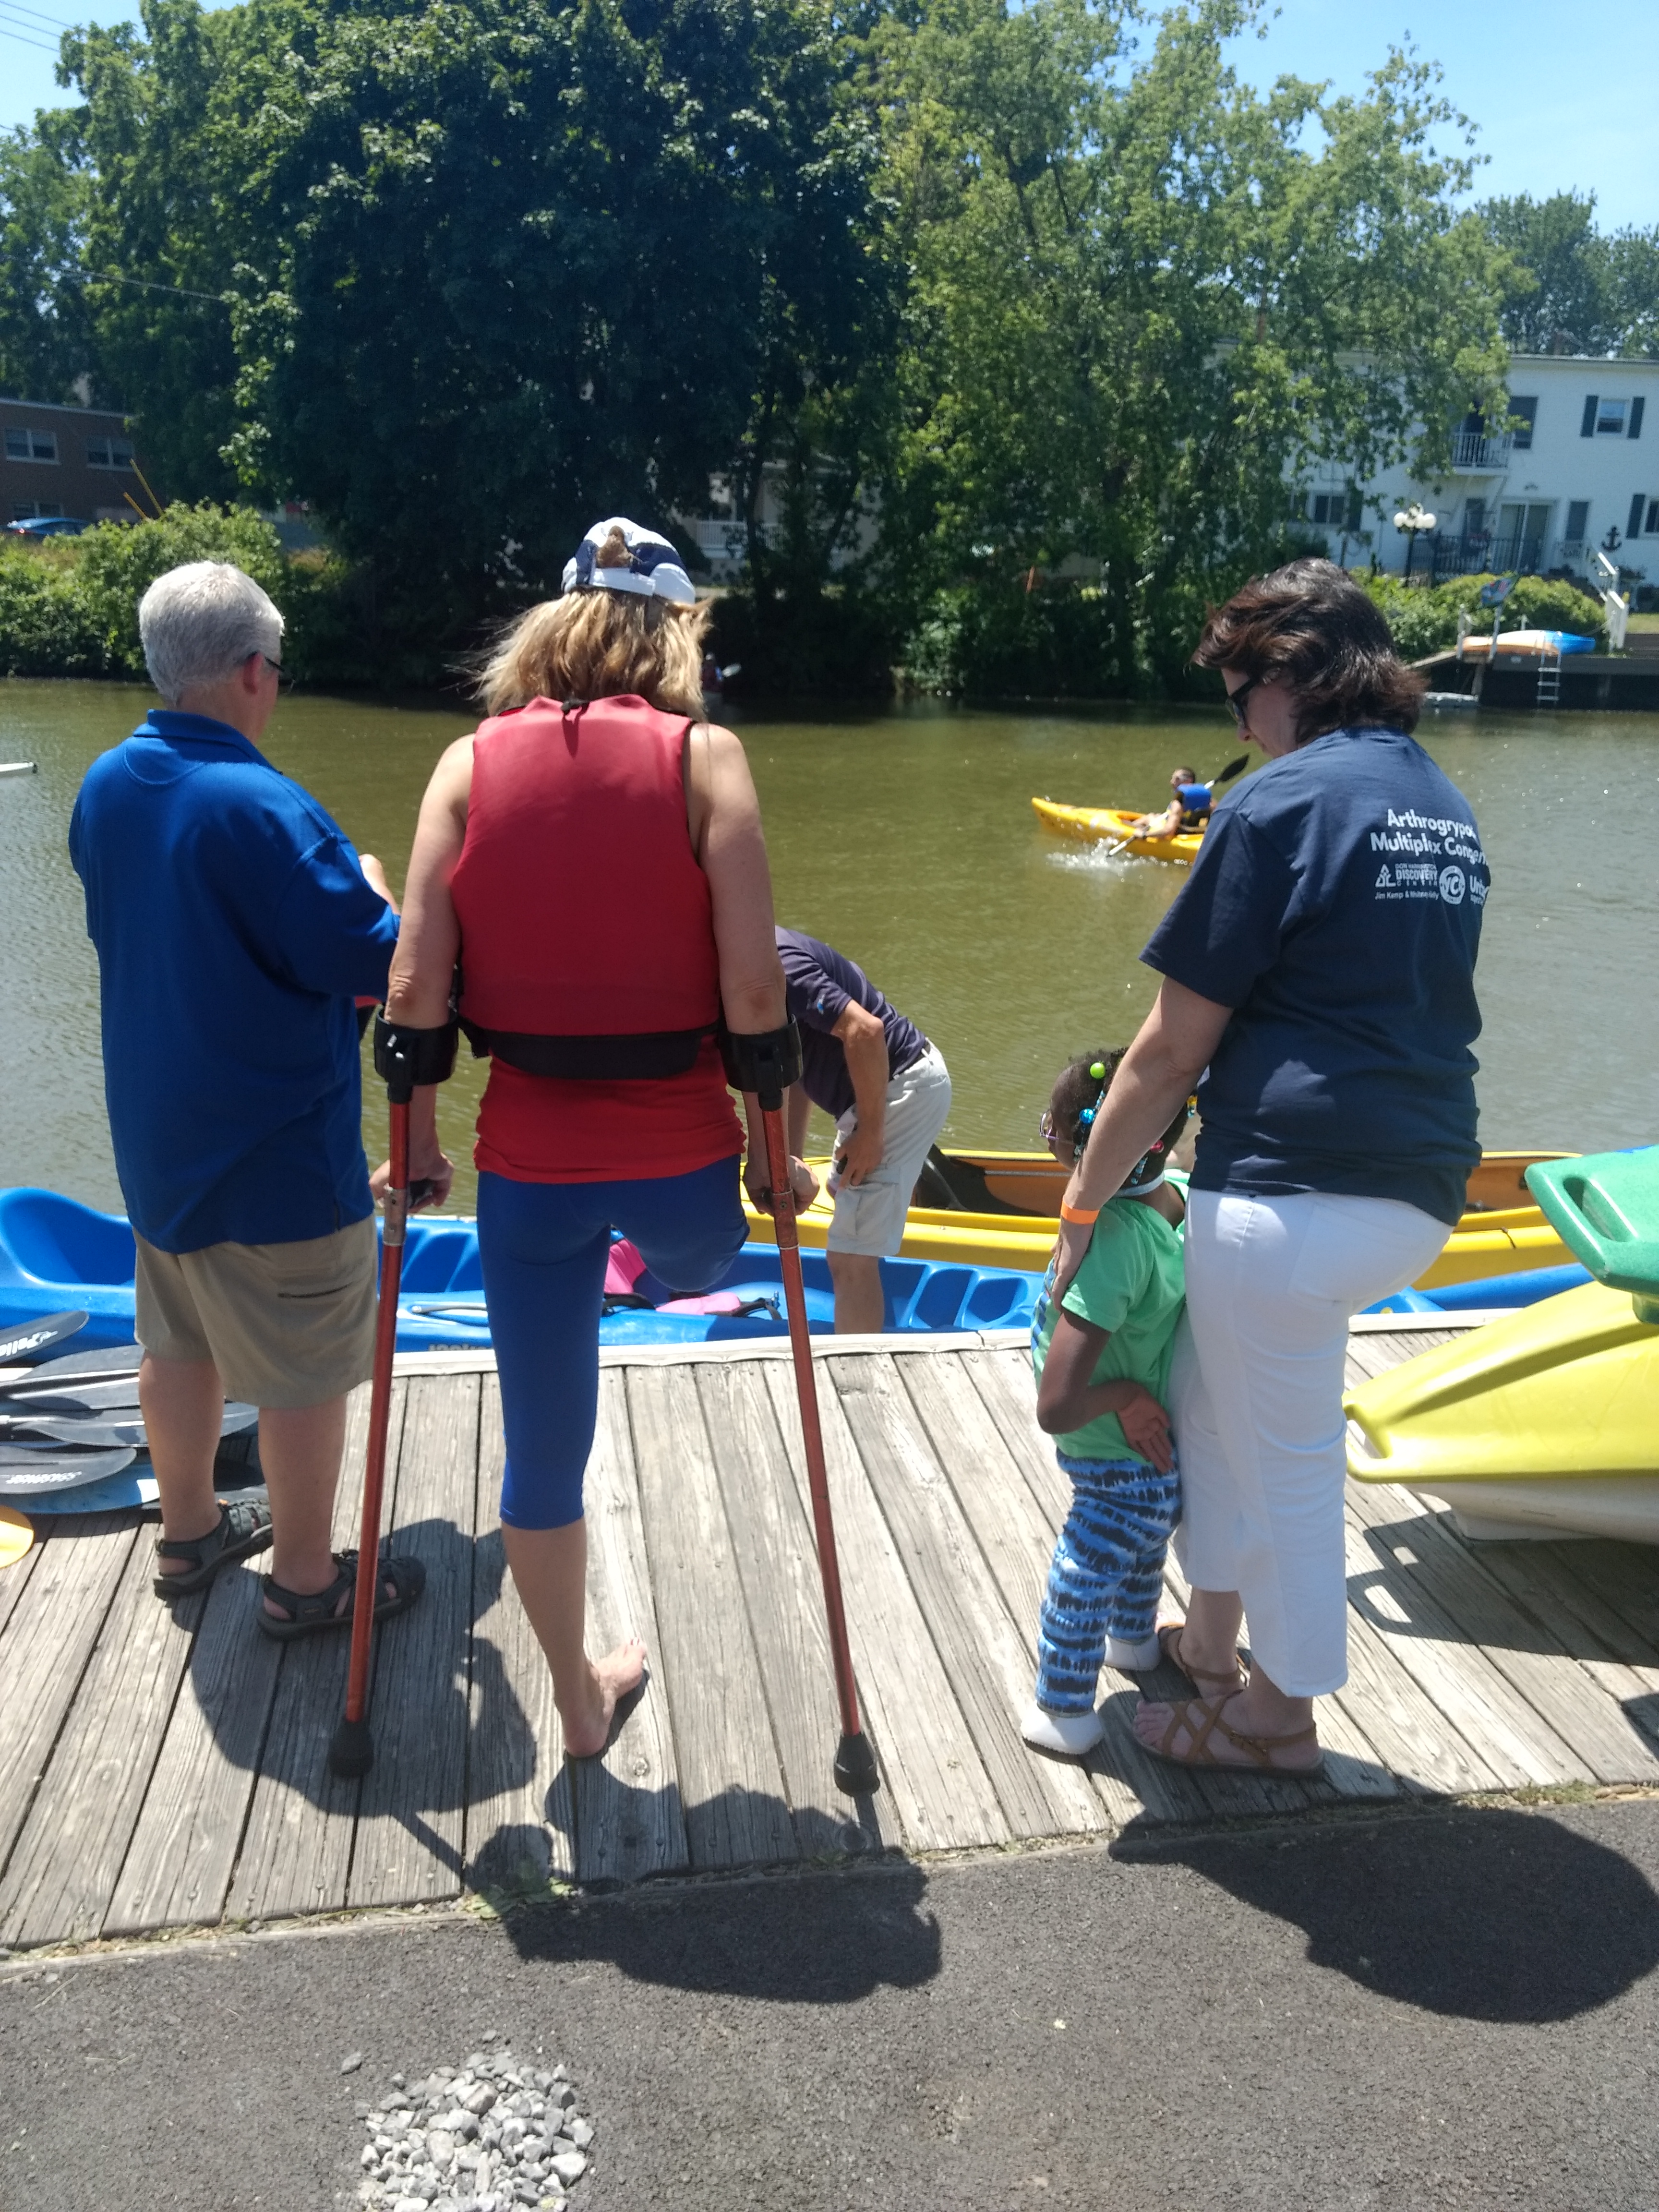 Three adults and one child, two with leg amputation, survey kayaks on a dock before going kayaking